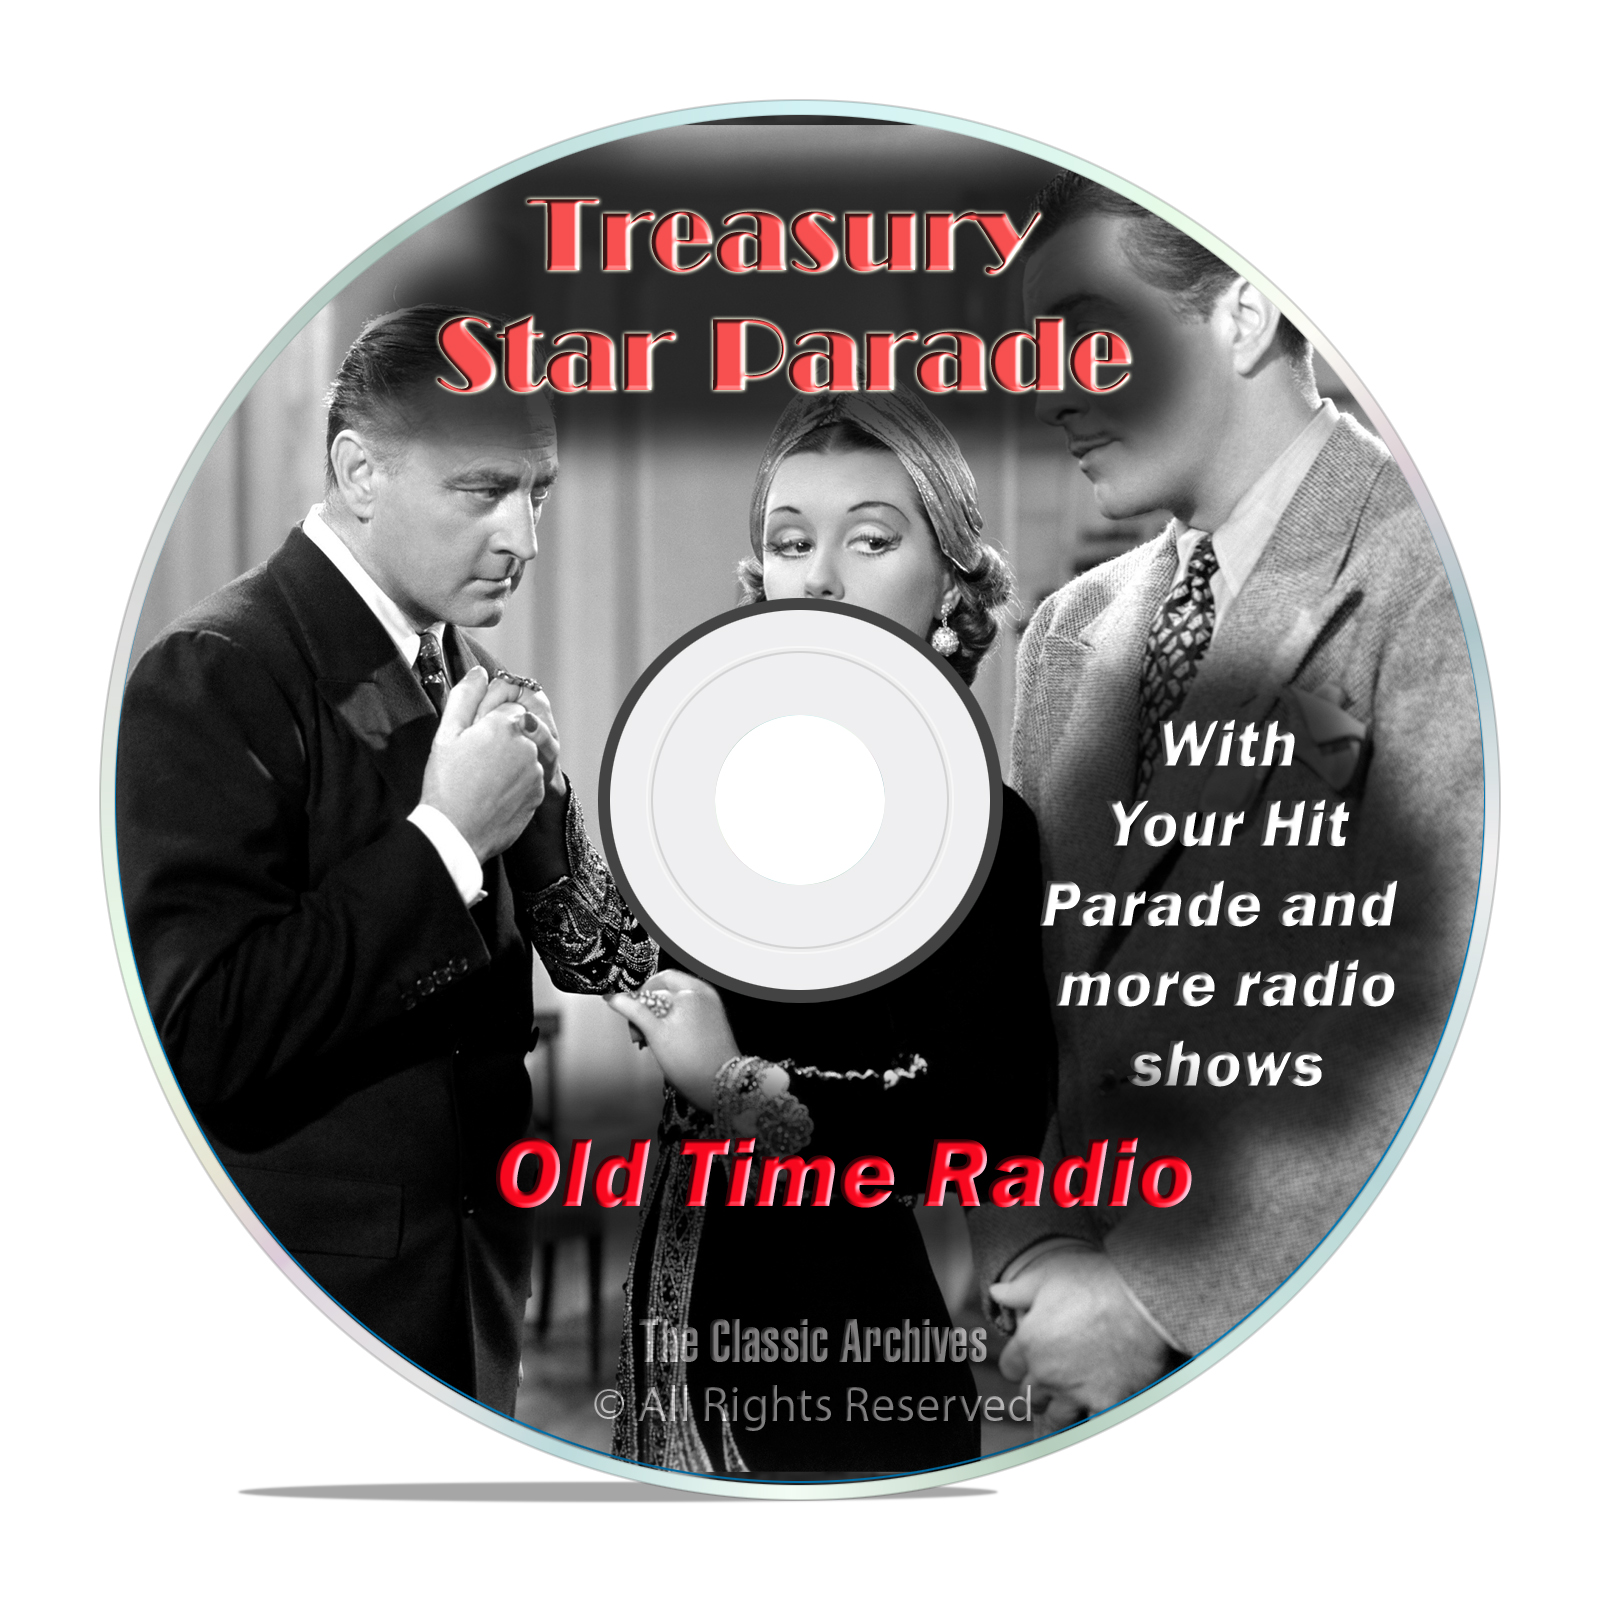 Treasury Star Parade, 997 Old Time Radio Music, Country, Western Shows DVD